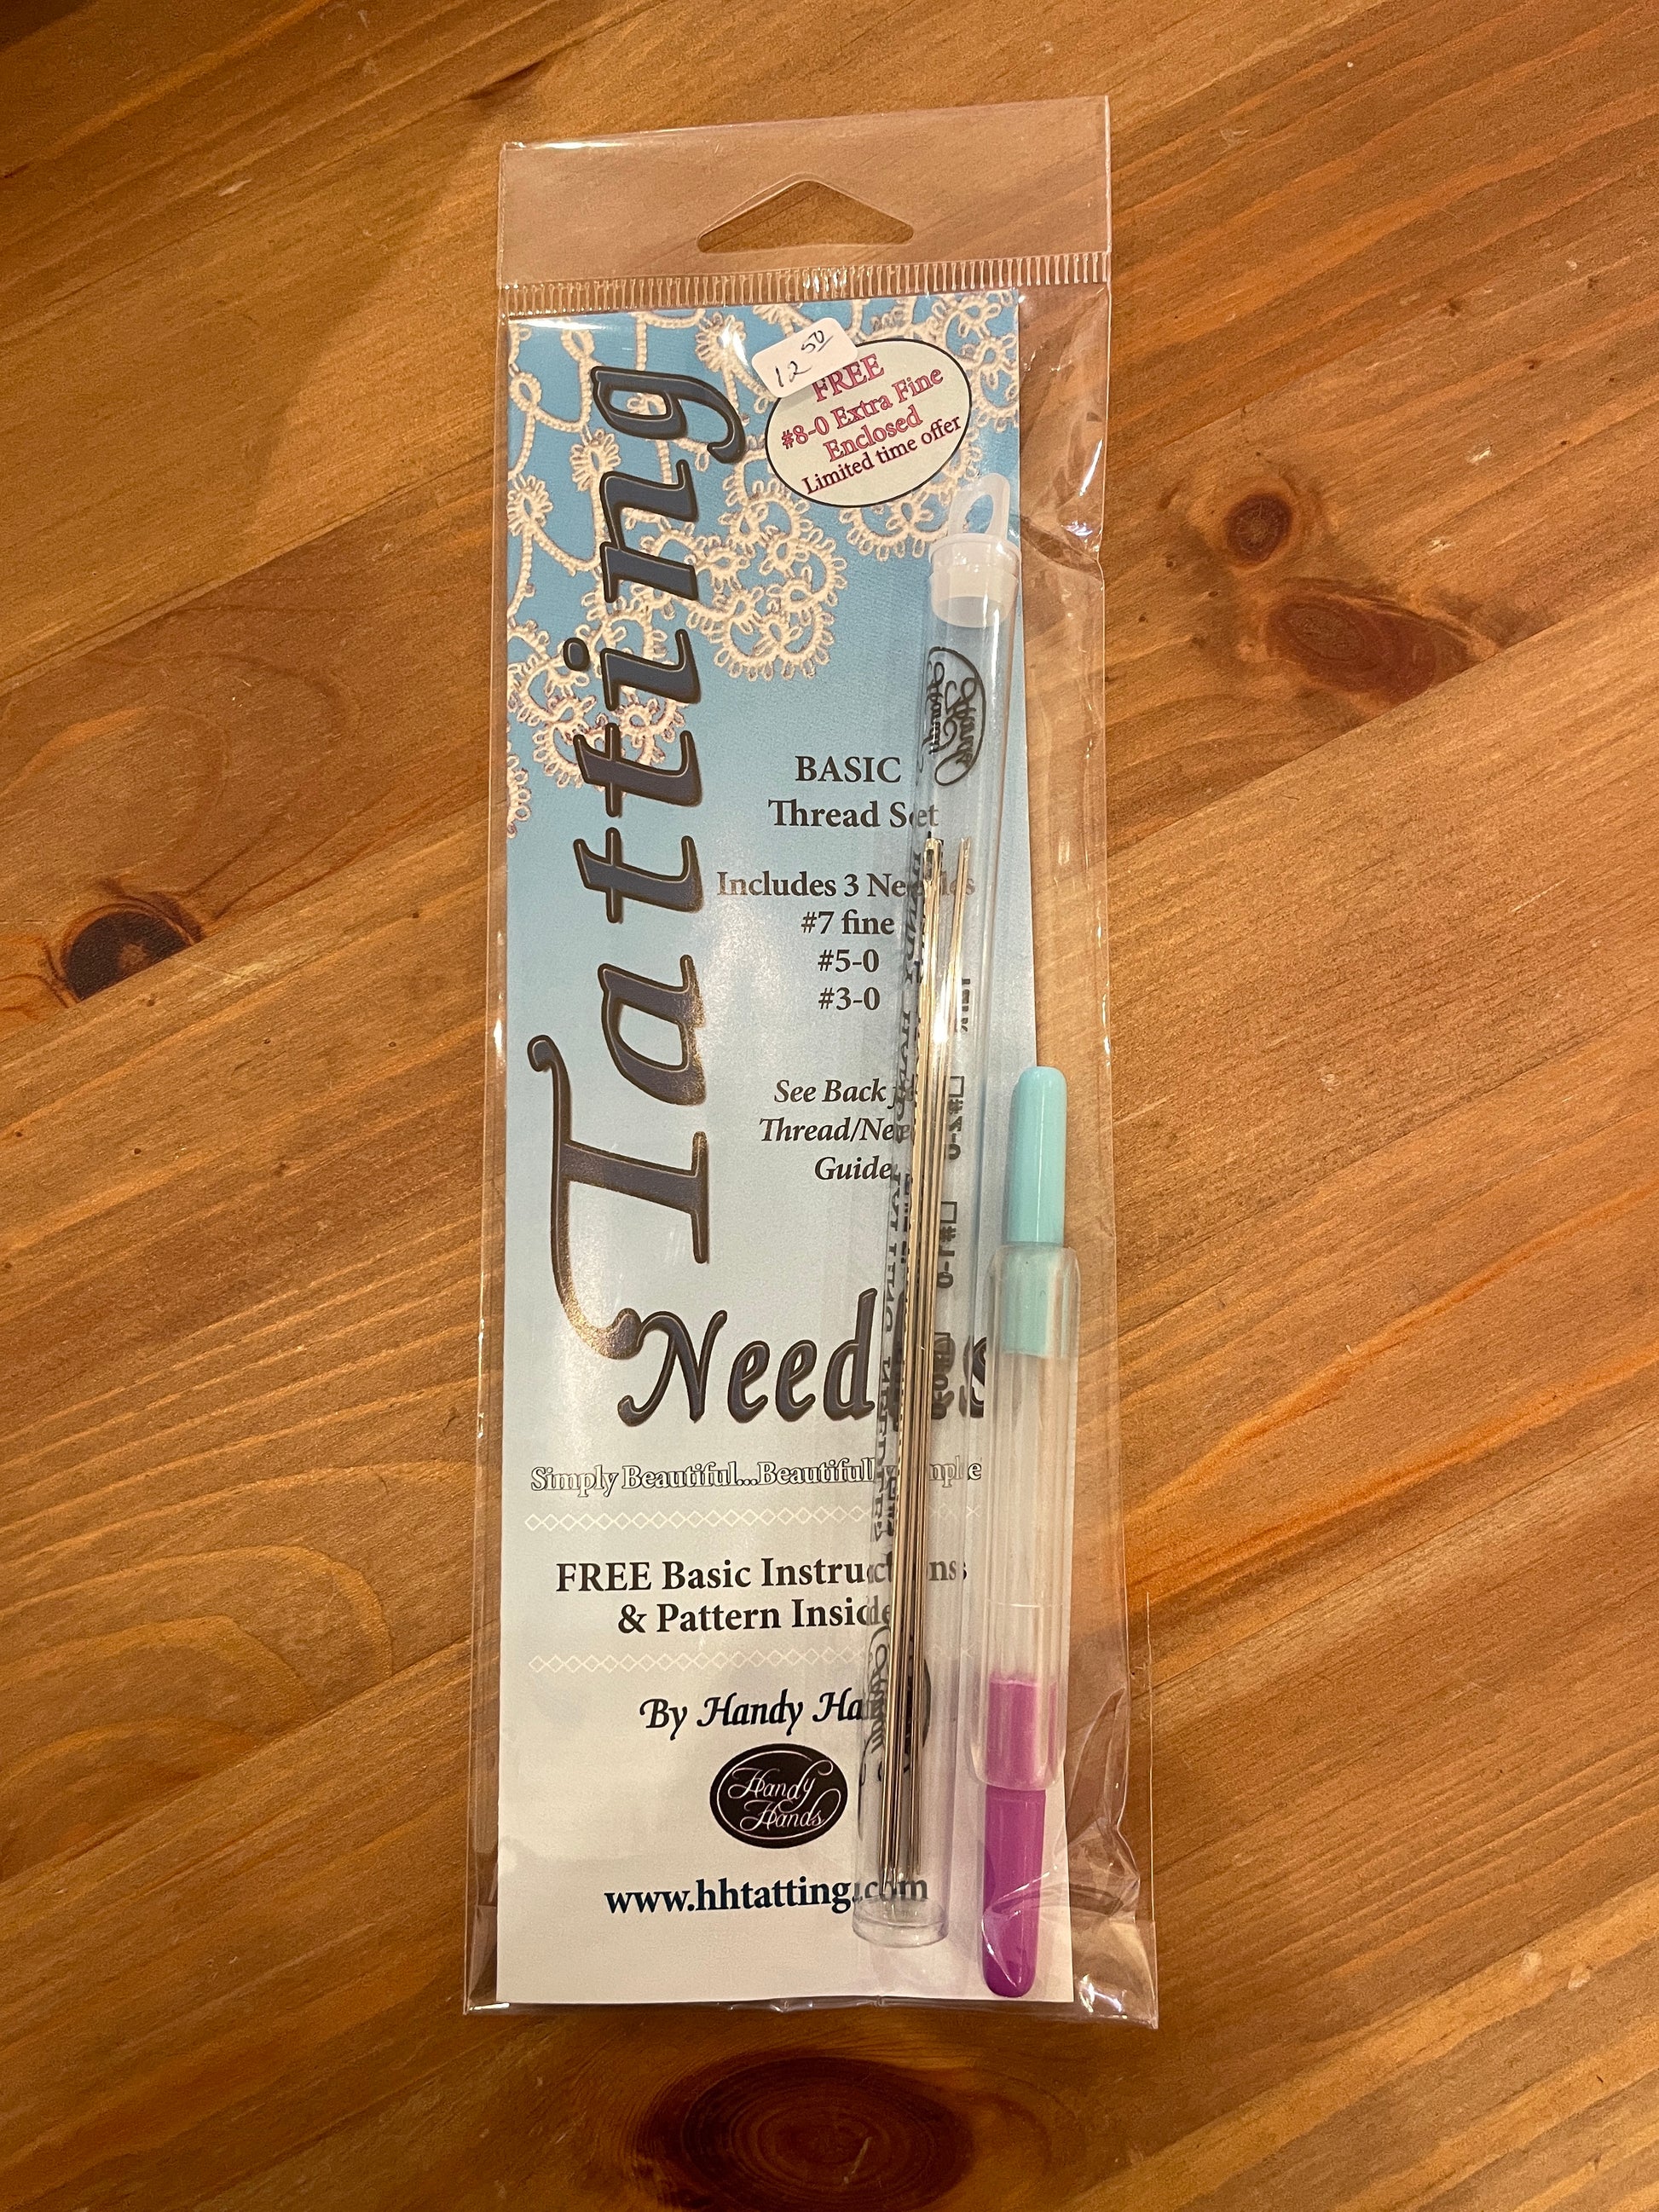 Needle tatting needles and thread info for beginners 